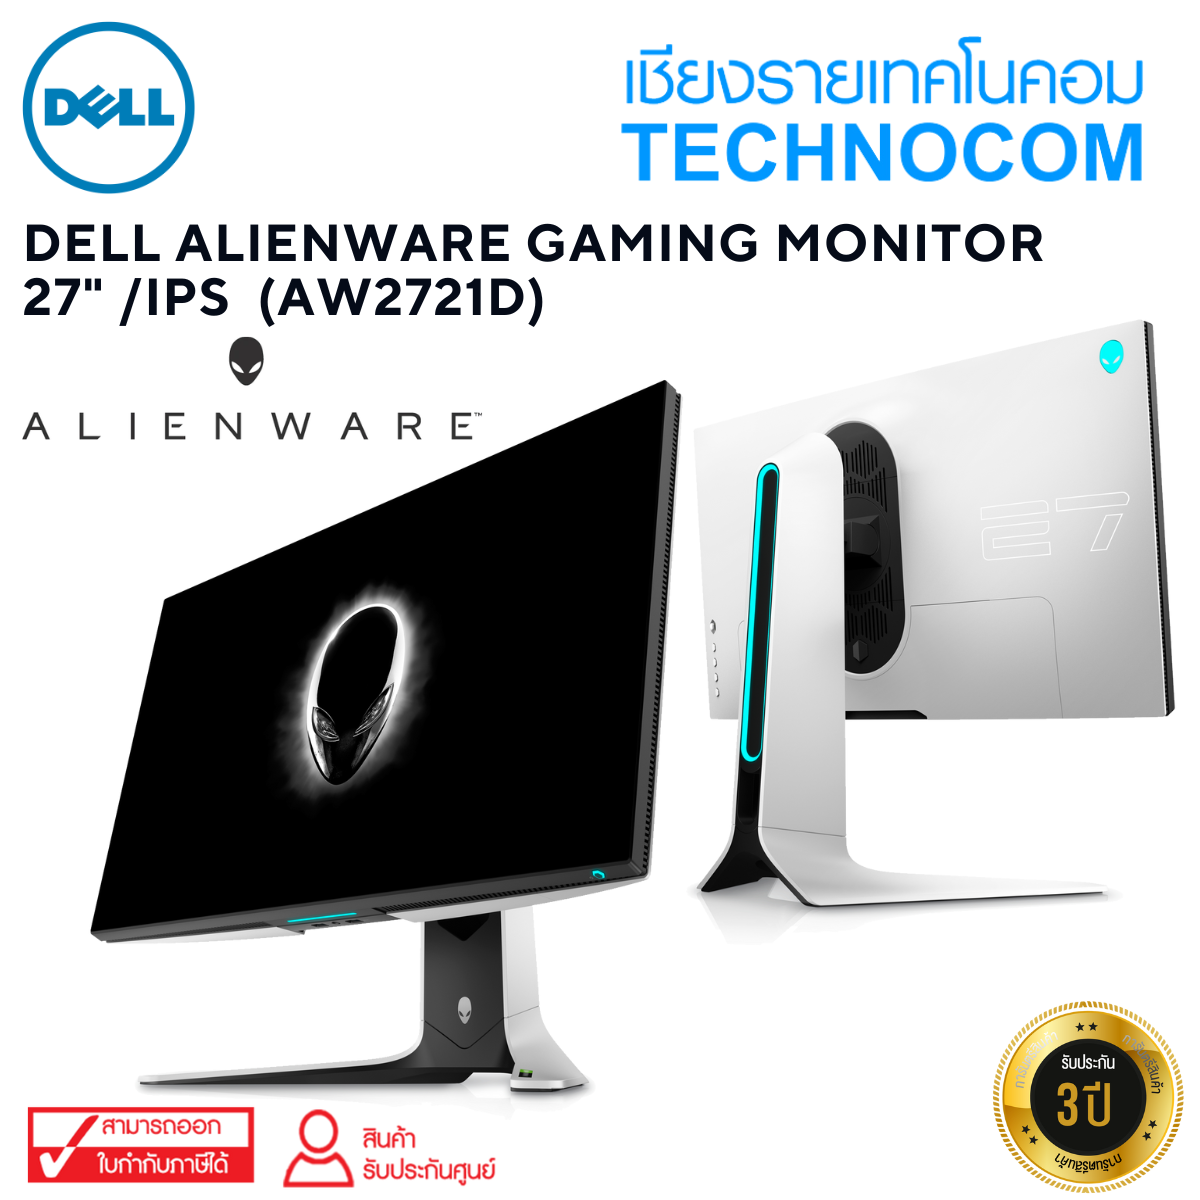 DELL ALIENWARE GAMING MONITOR 27"/IPS / 240Hz  (AW2721D)